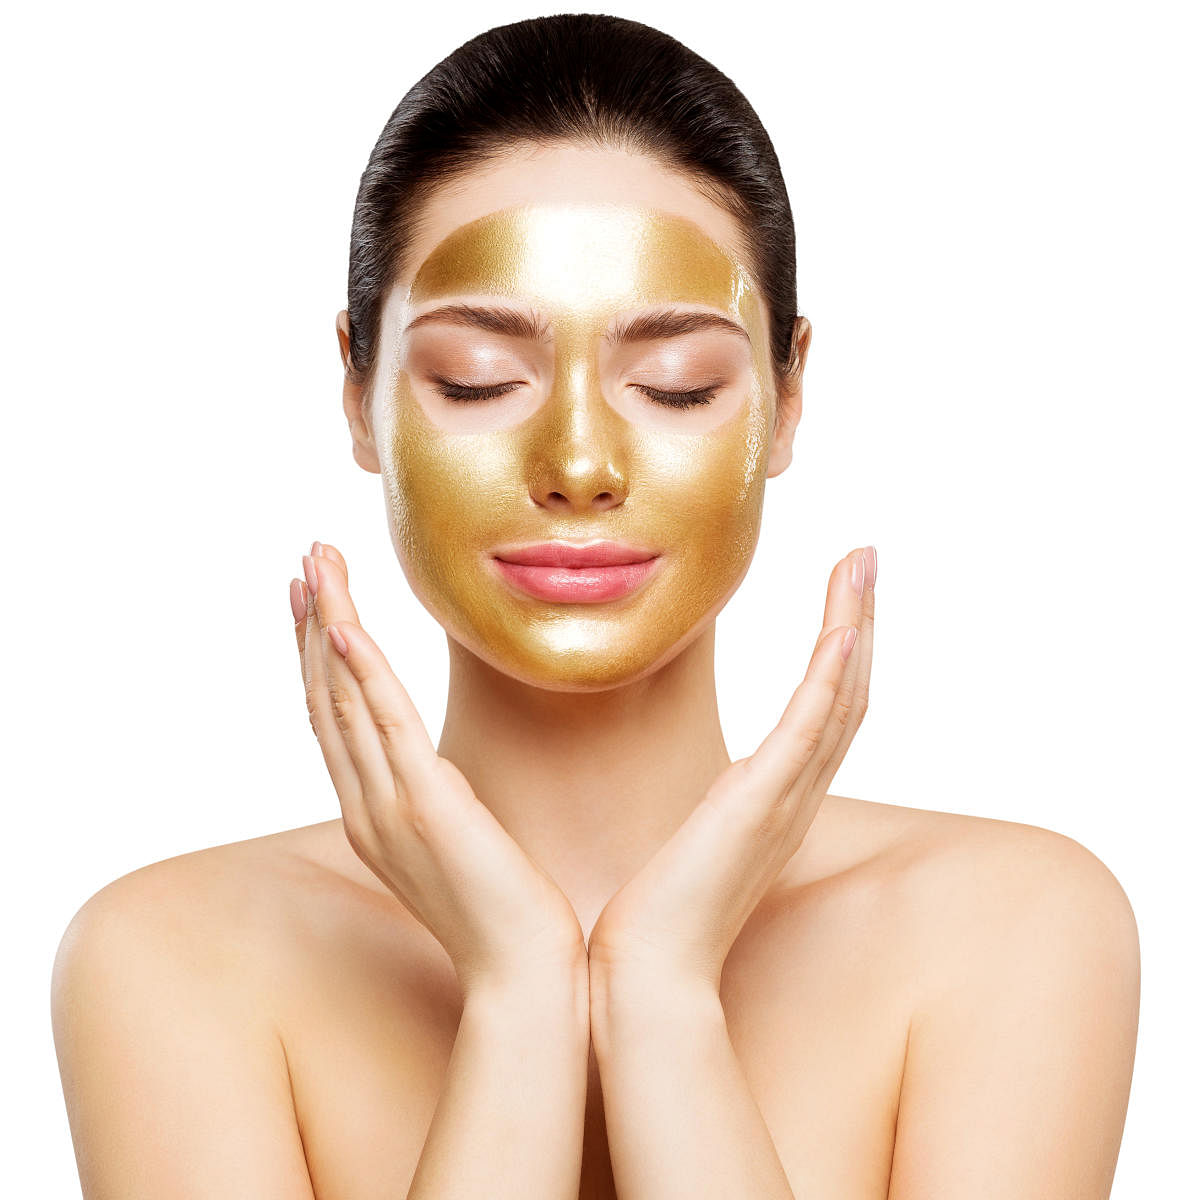 Avoid wearing make-up for at least 6 hours after a facial treatment.